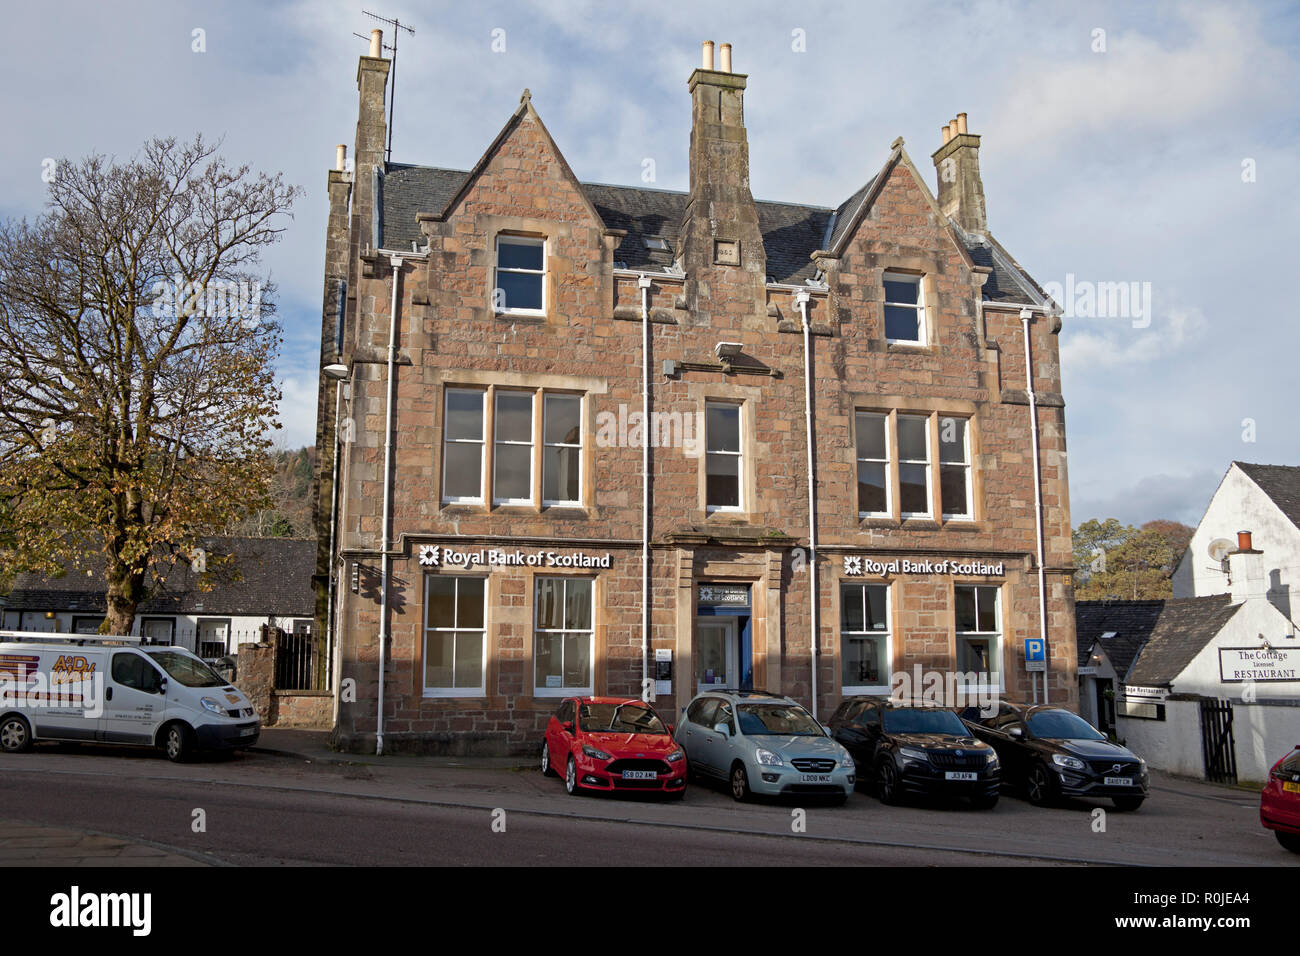 Royal Bank of Scotland, Inverary, Argyll and Bute, Ecosse, Royaume-Uni Banque D'Images